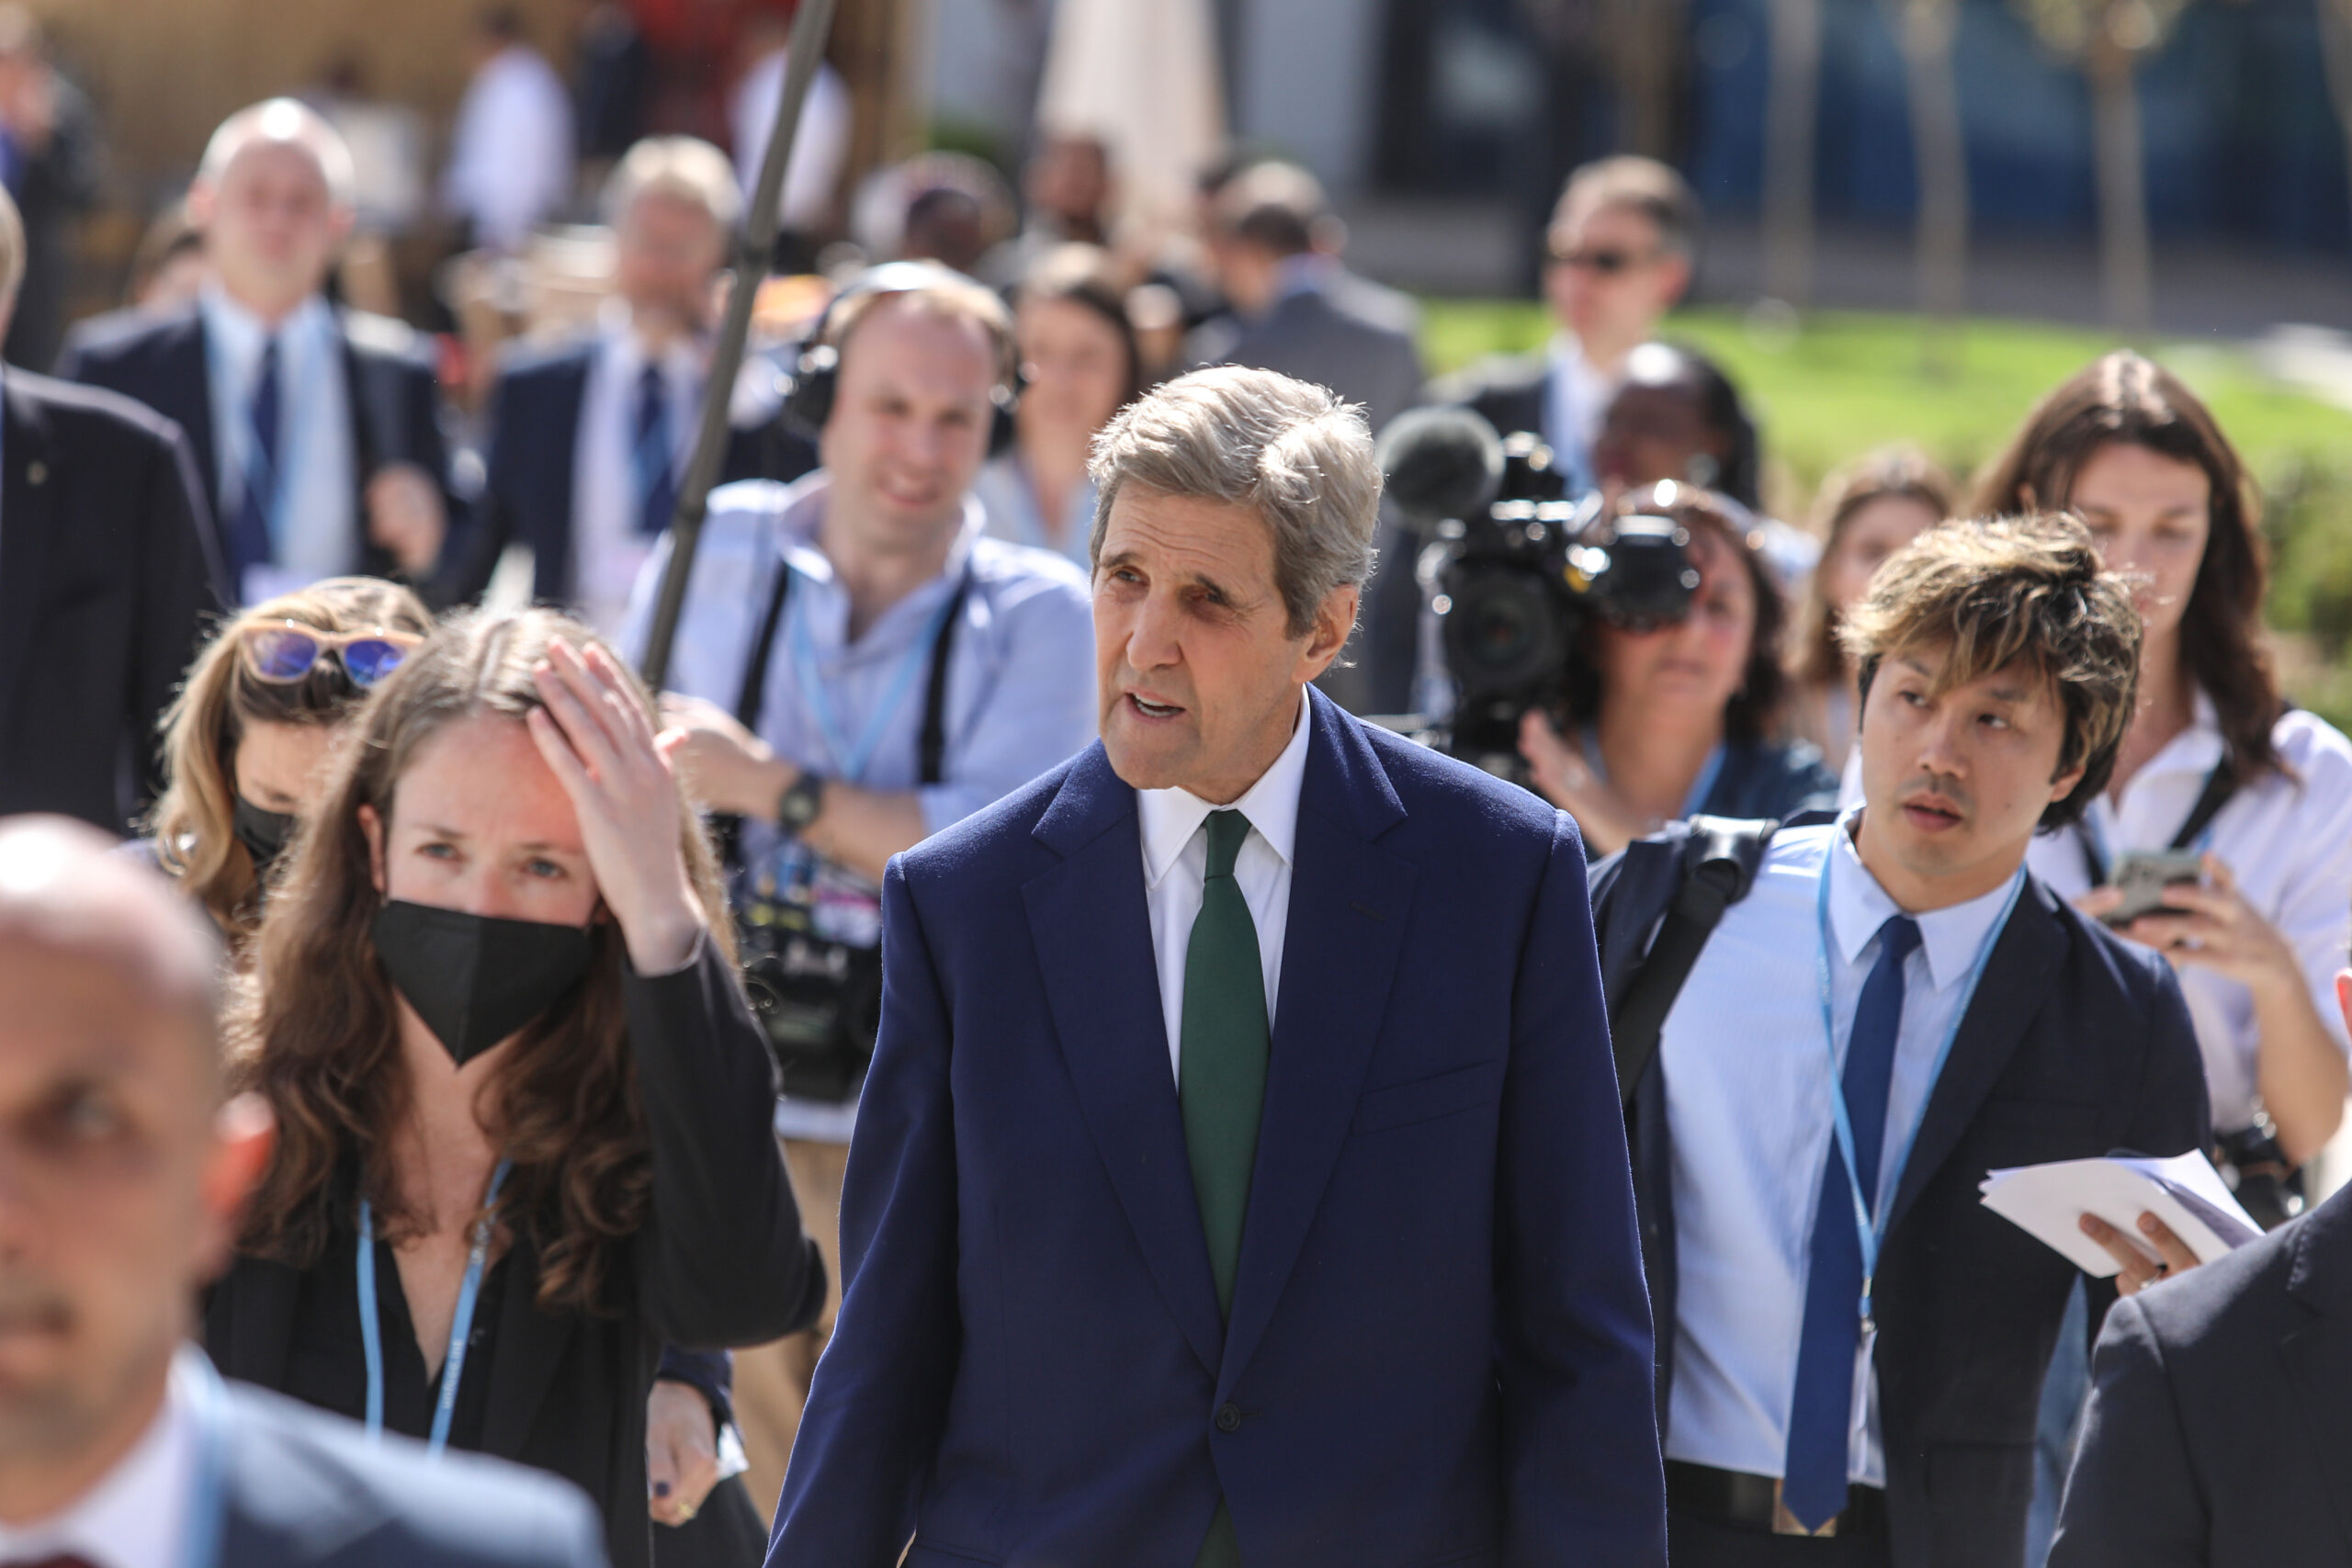 United States Special Presidential Envoy for Climate John Kerry (C) is being welcomed by officials upon his arrival to attend the 2022 United Nations Climate Change Conference (COP27) on November 08, 2022 [Mohamed Abdel Hamid/Anadolu Agency]